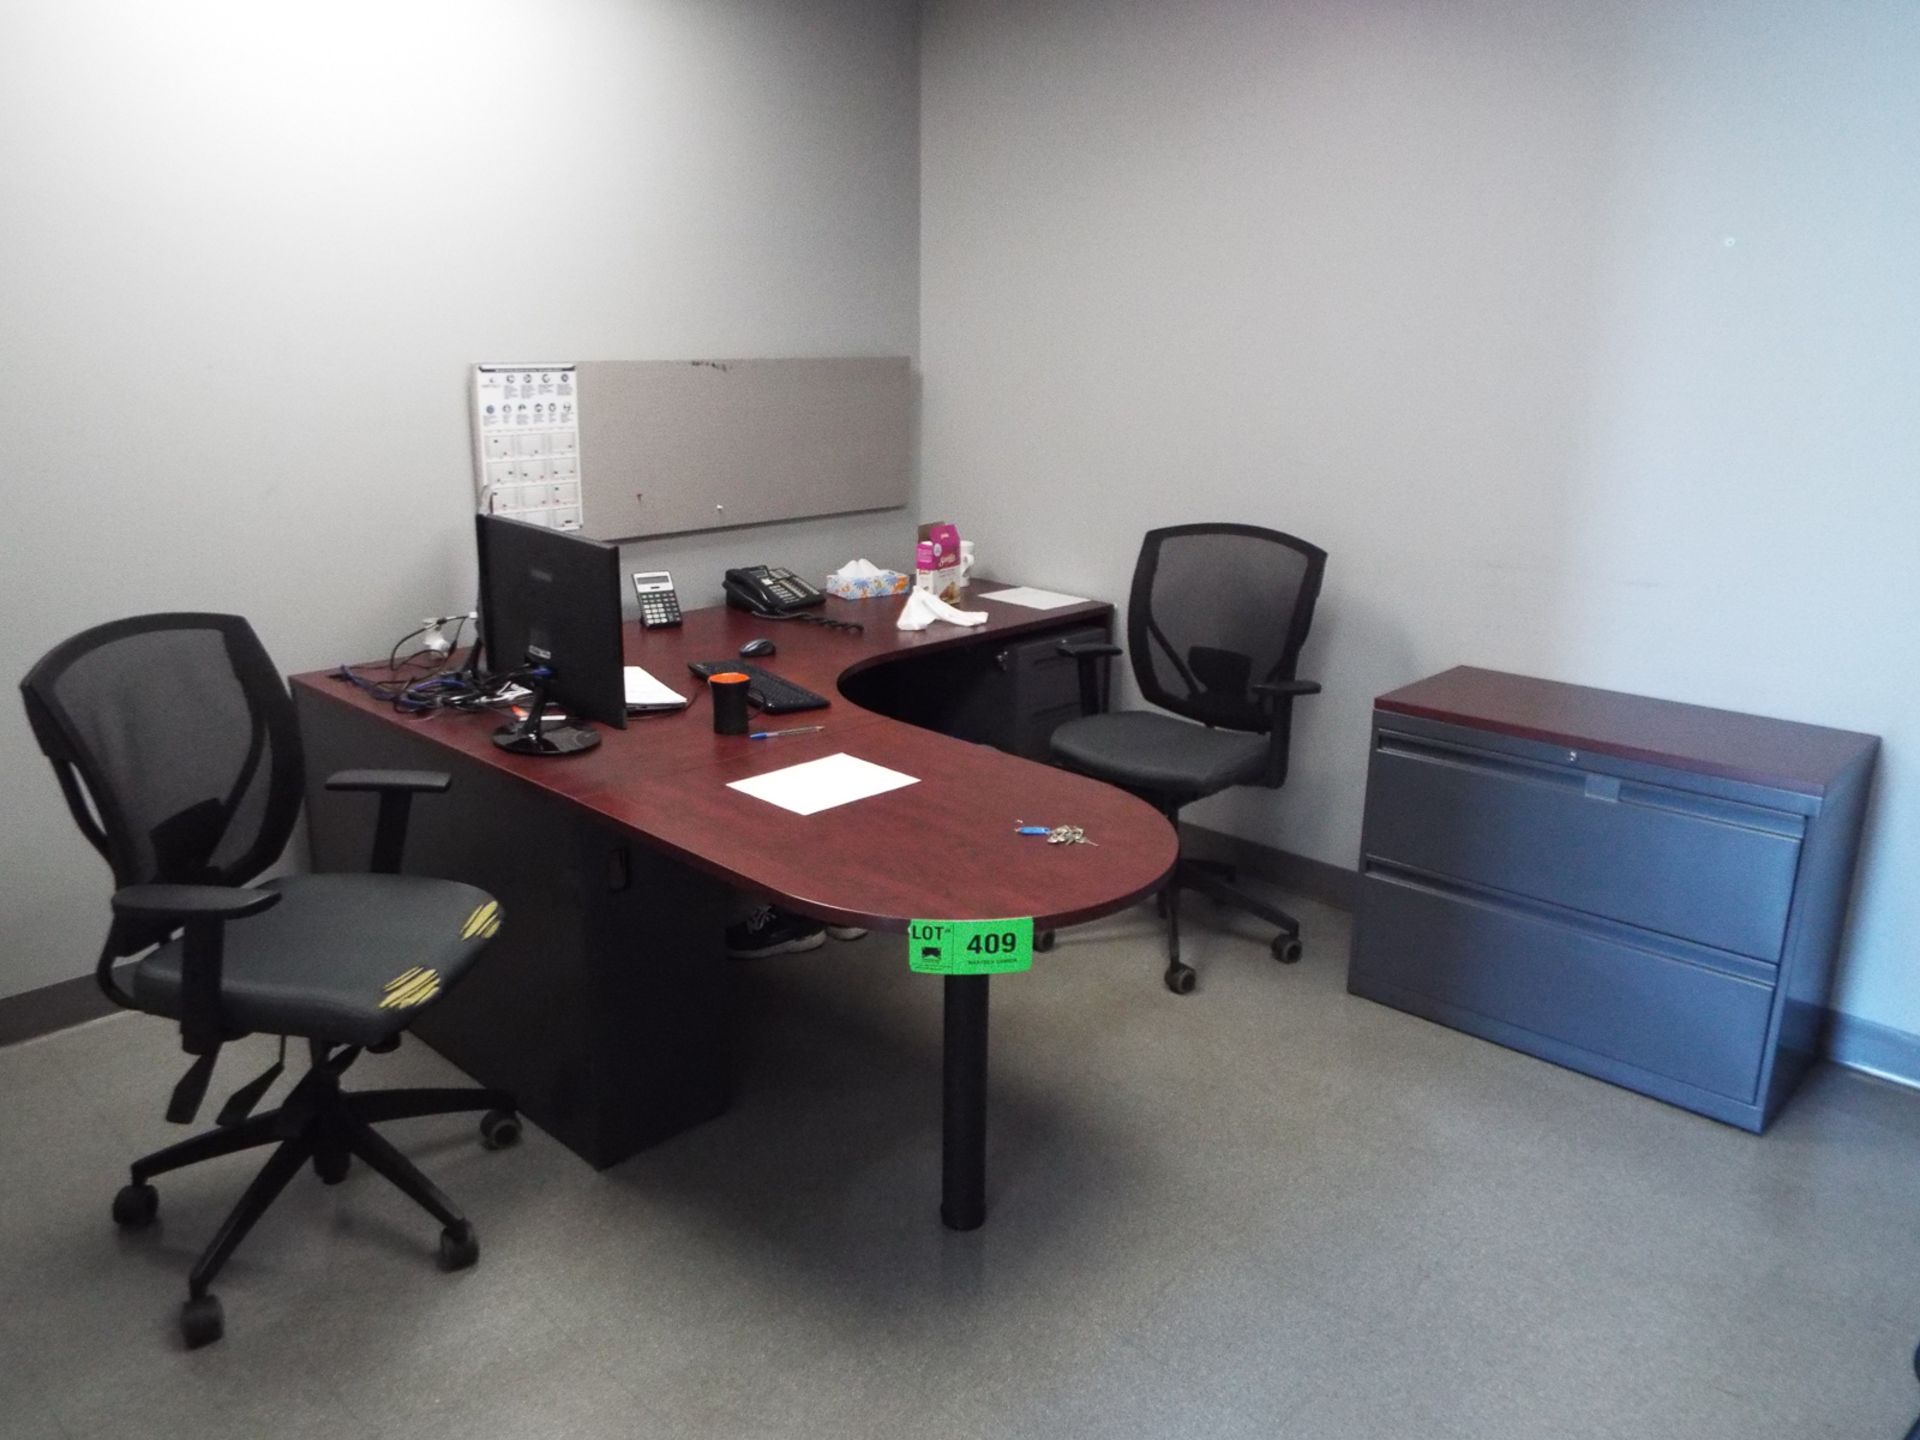 LOT/ CONTENTS OF OFFICE (FURNITURE ONLY) - L-SHAPED DESK, OFFICE CHAIRS, 2 DRAWER LATERAL FILE